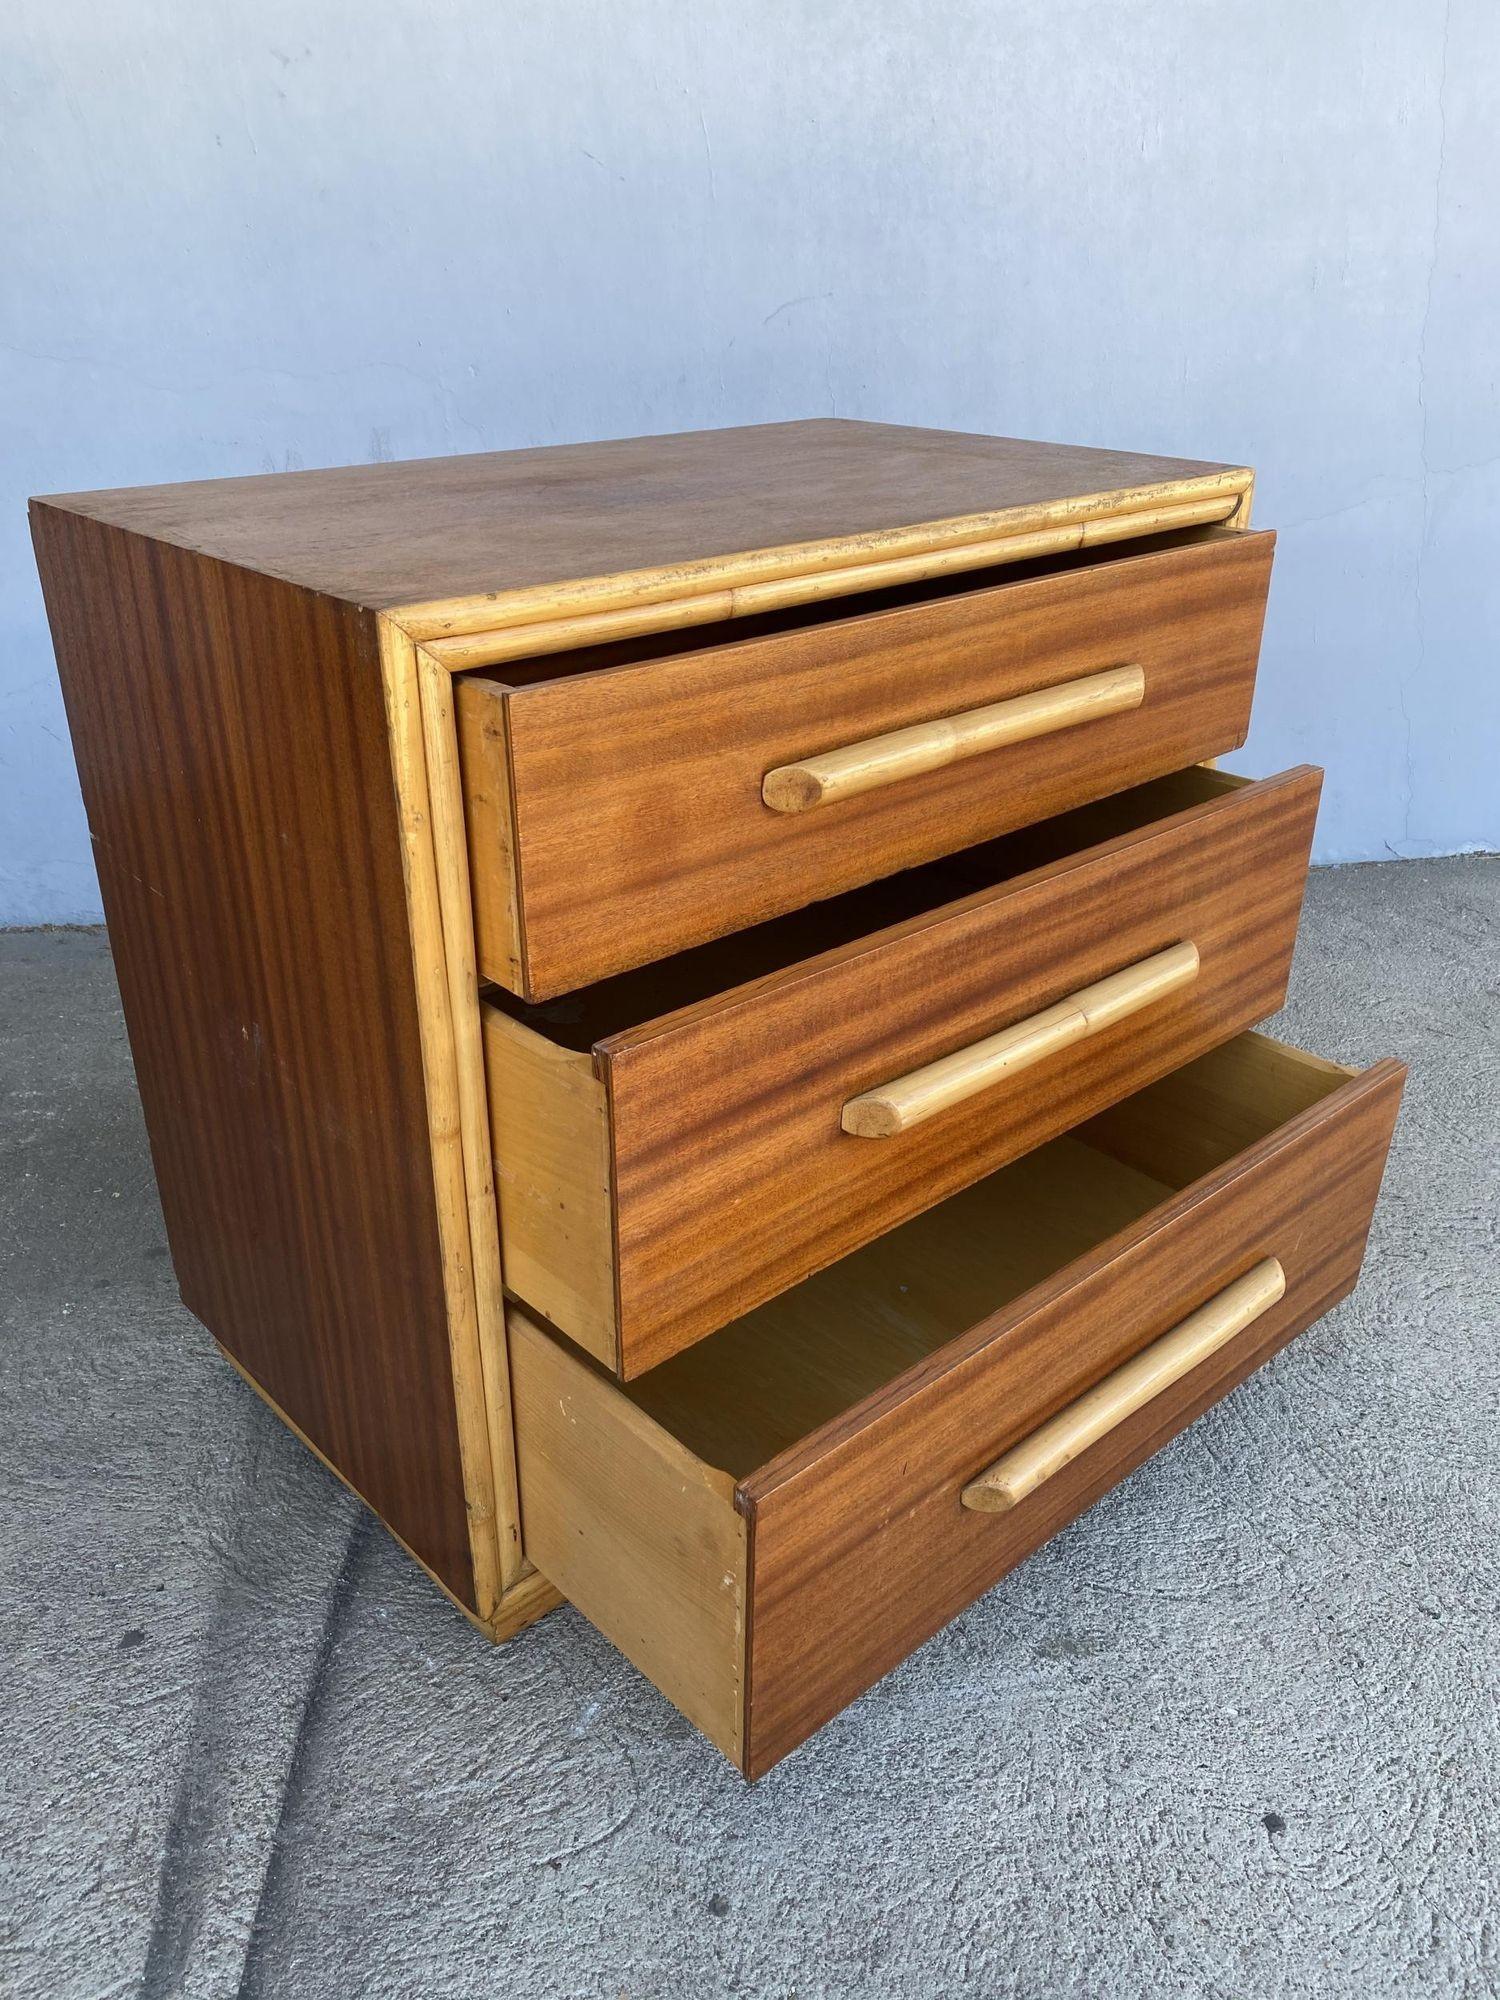 Restored Mahogany Lowboy Dresser Nightstand W/ Rattan Accents In Excellent Condition For Sale In Van Nuys, CA